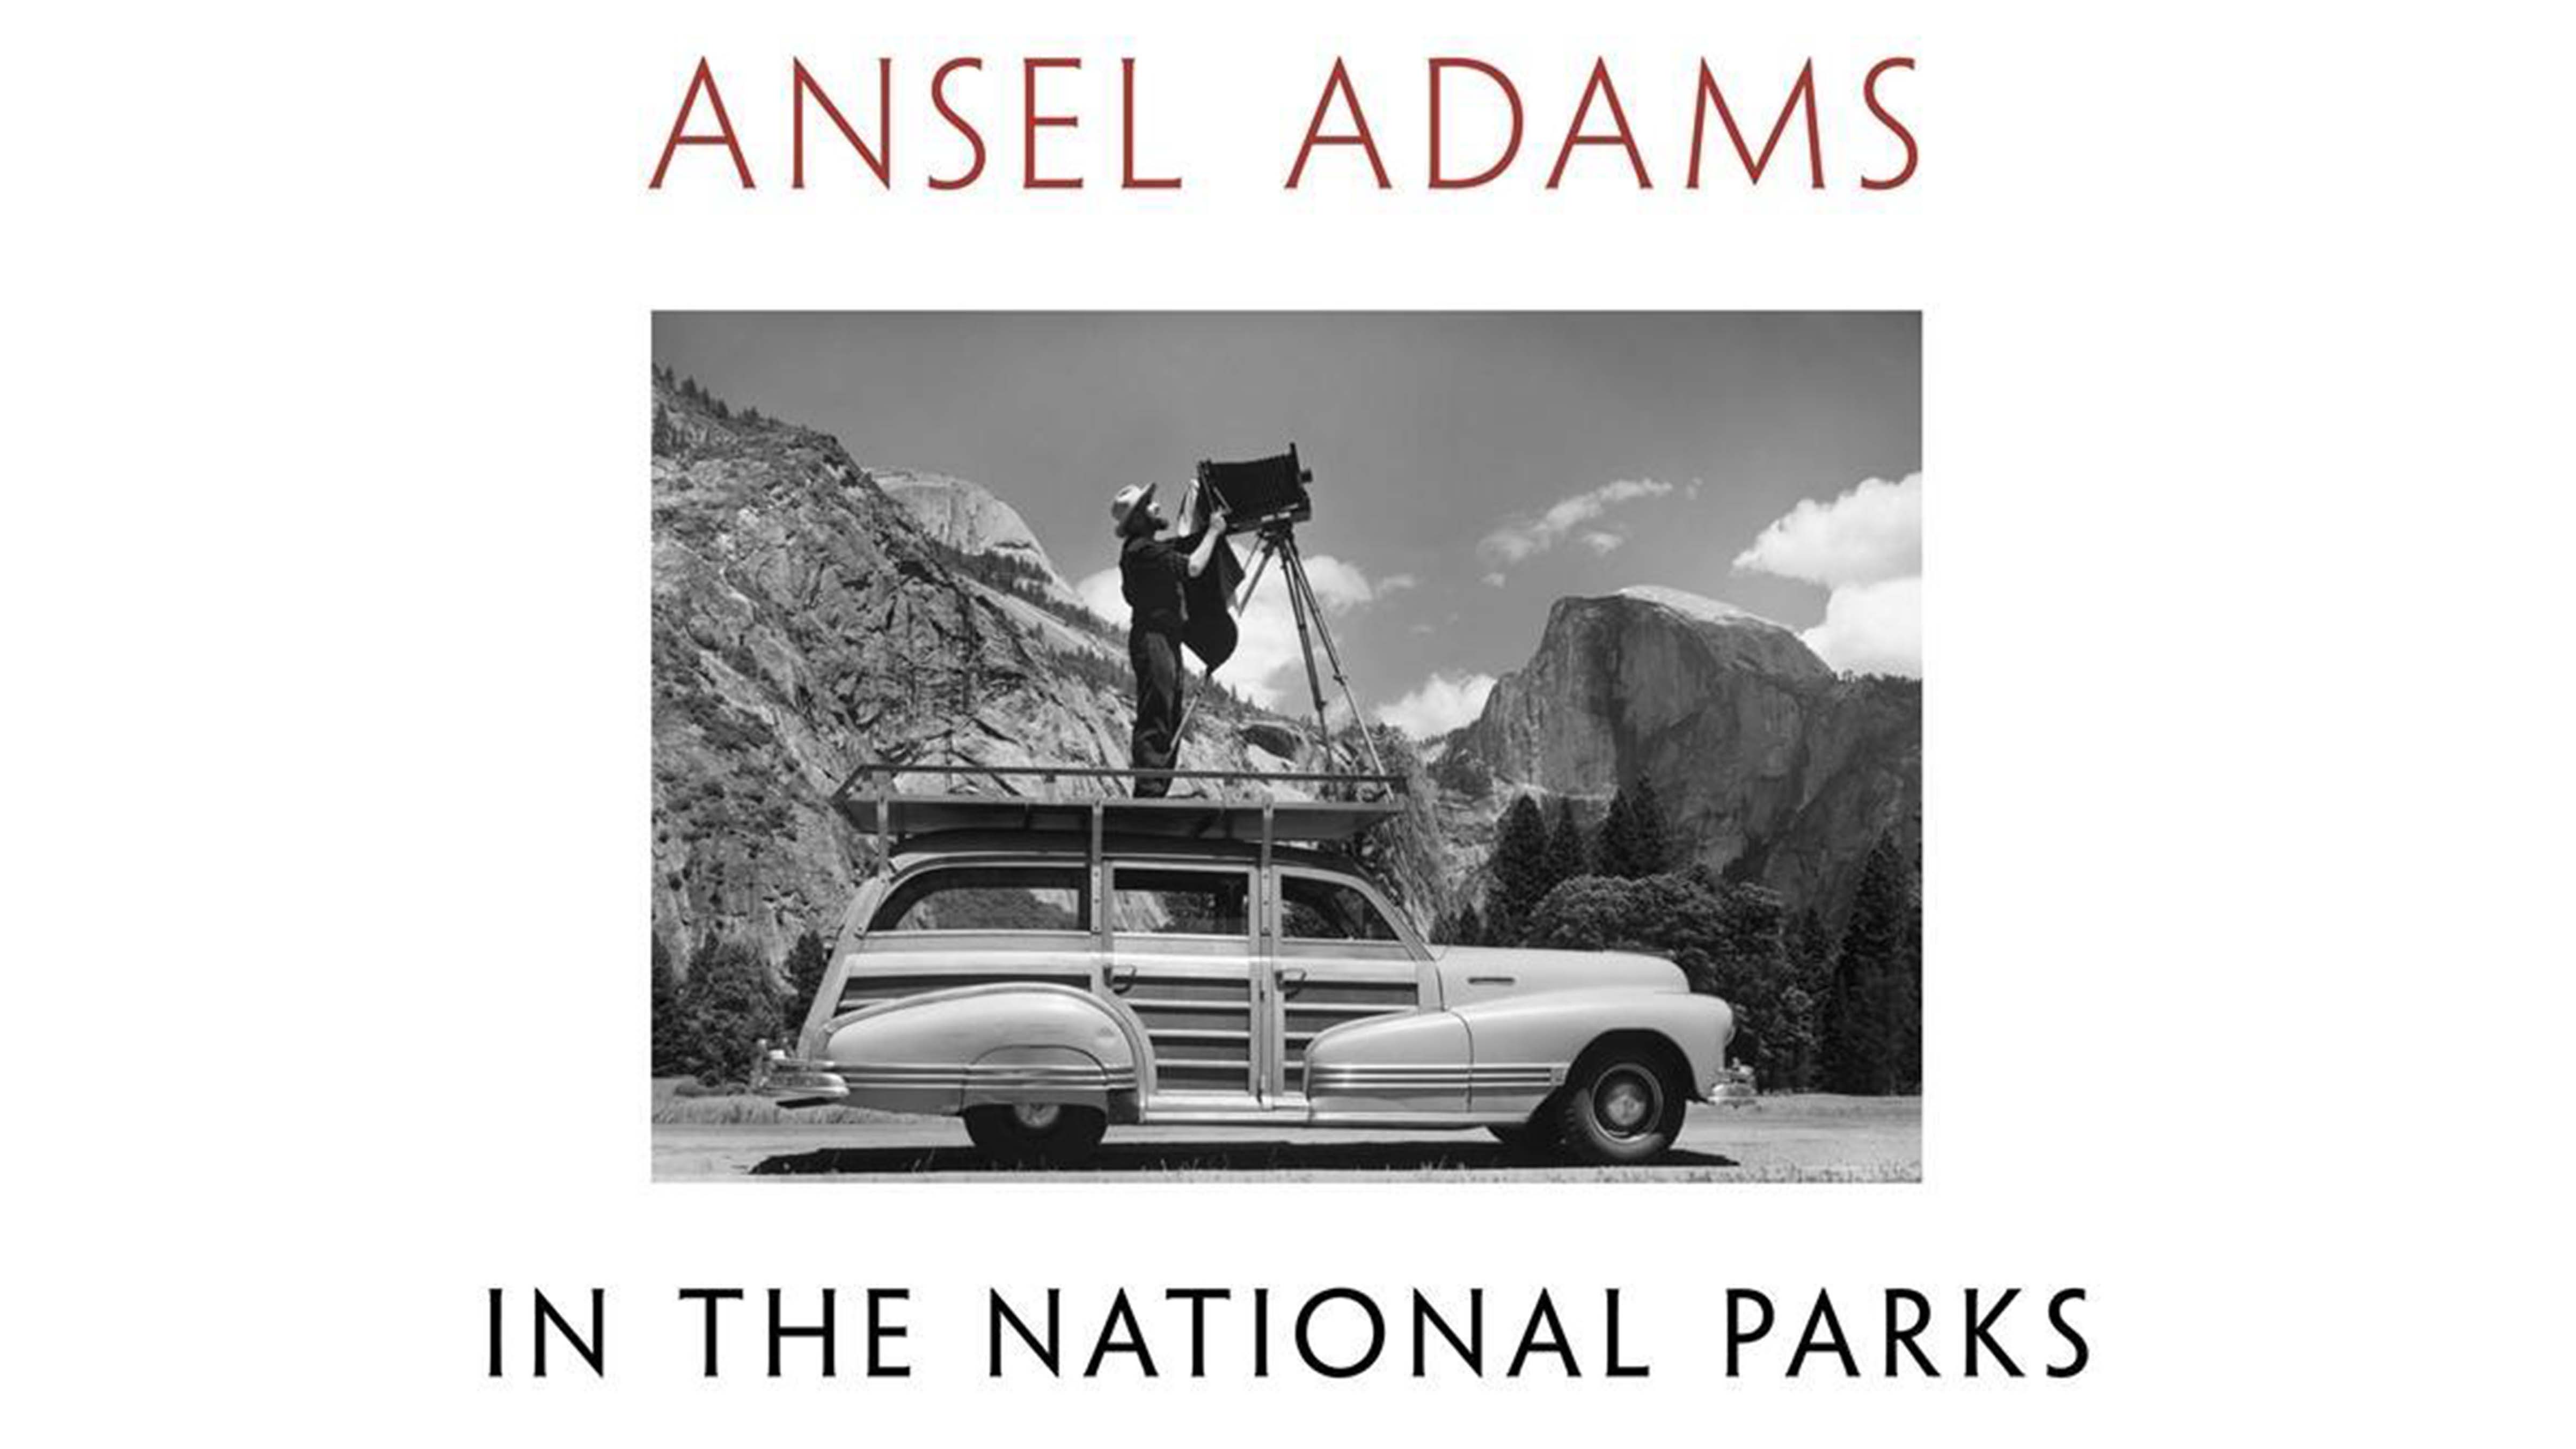 Best photography books: Ansel Adams in the National Parks